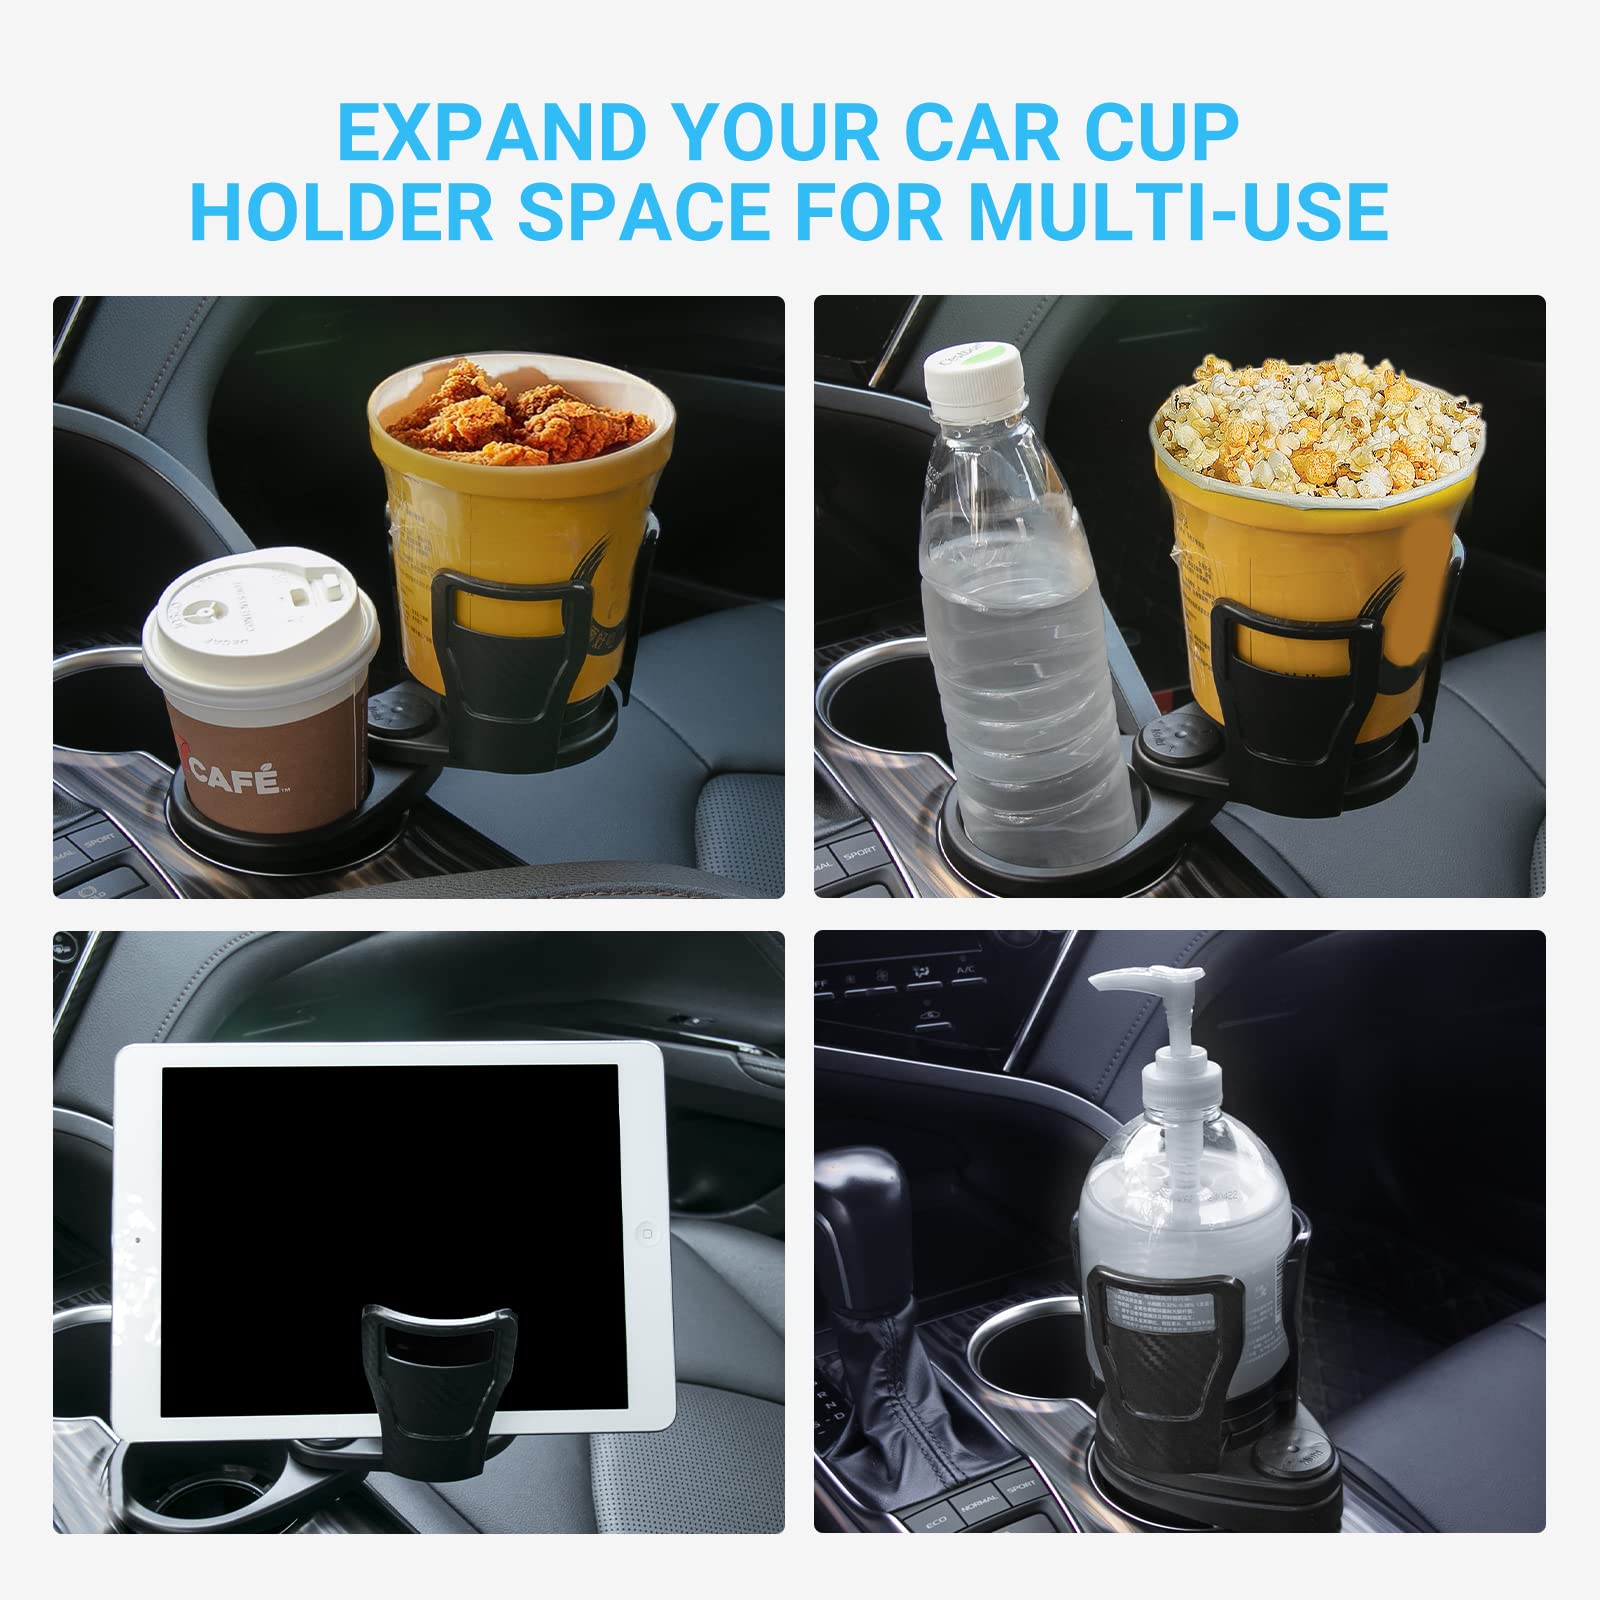 Car Drinking Bottle Holder 360 Degrees Rotatable Water Cup Holder Sunglasses Phone Organizer Storage Car Interior Accessories